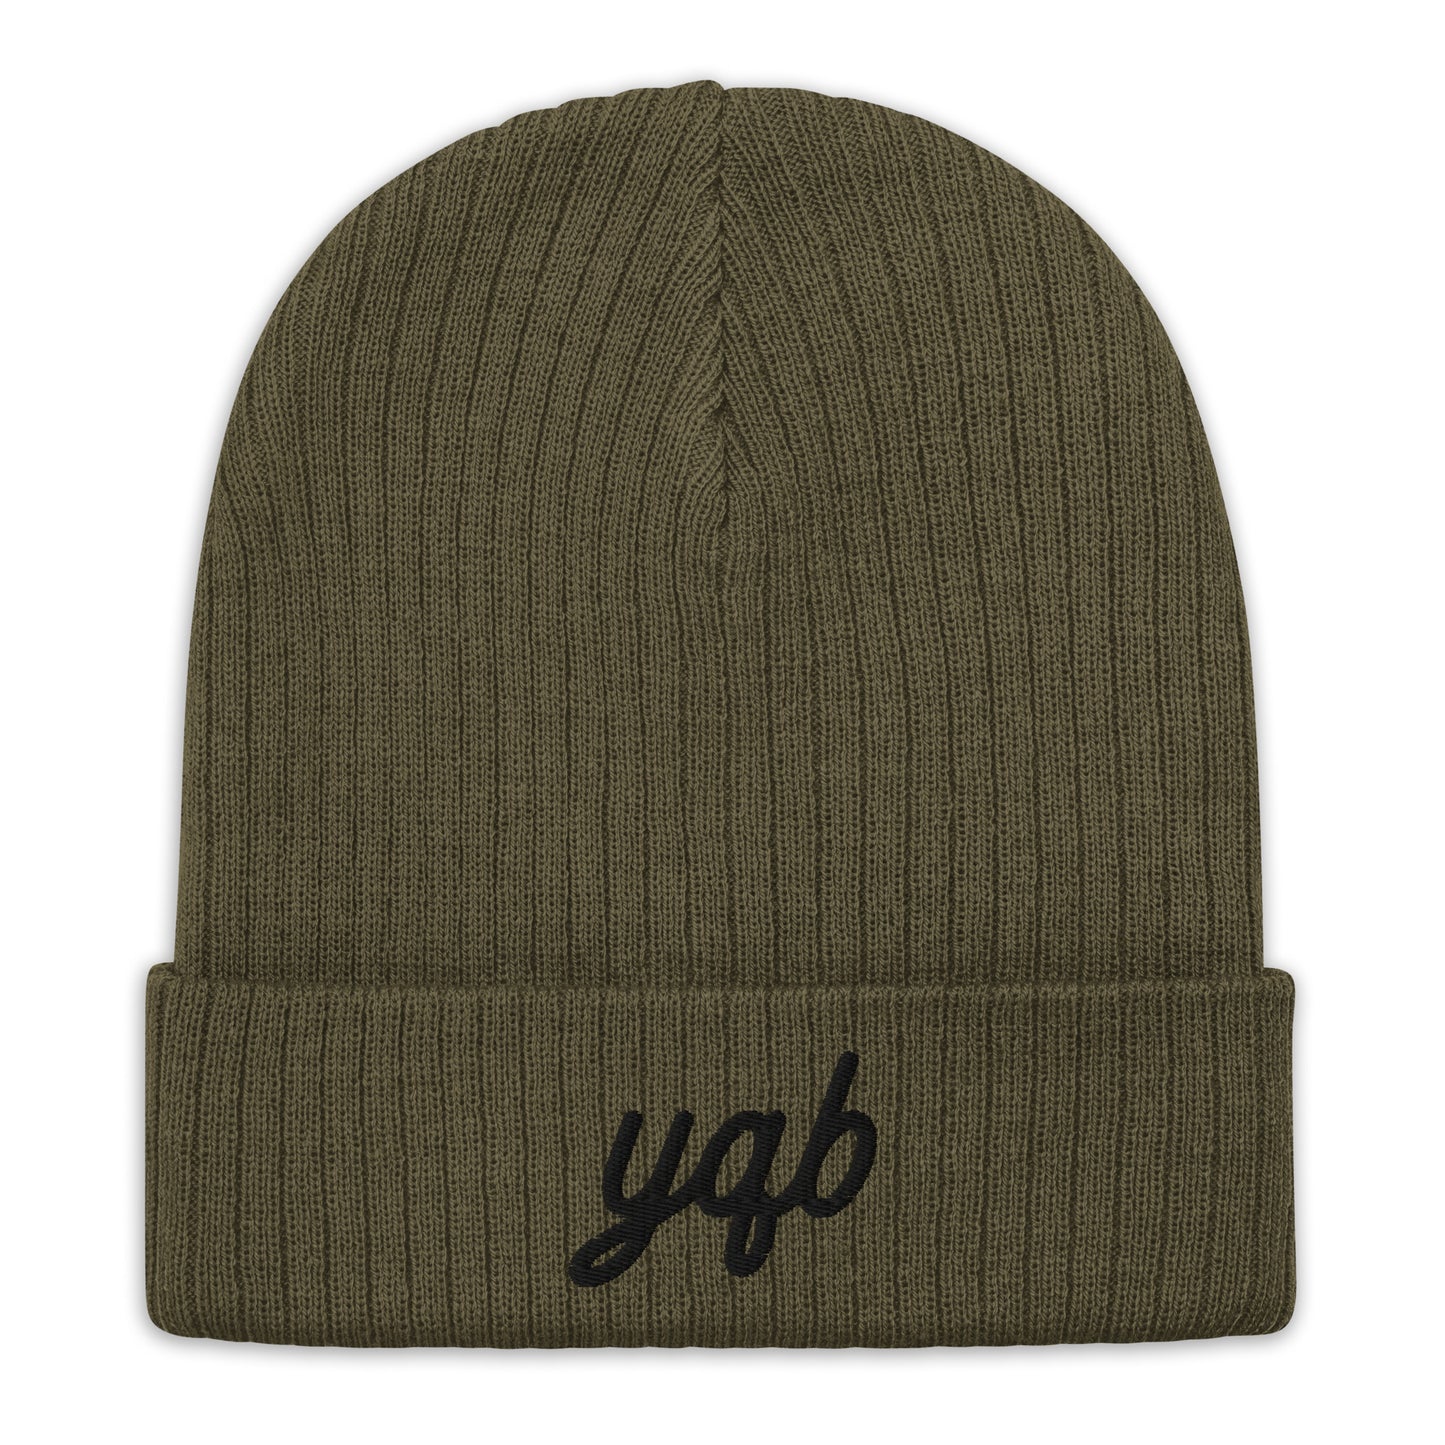 Vintage Script Recycled Cuffed Beanie • YQB Quebec City • YHM Designs - Image 09